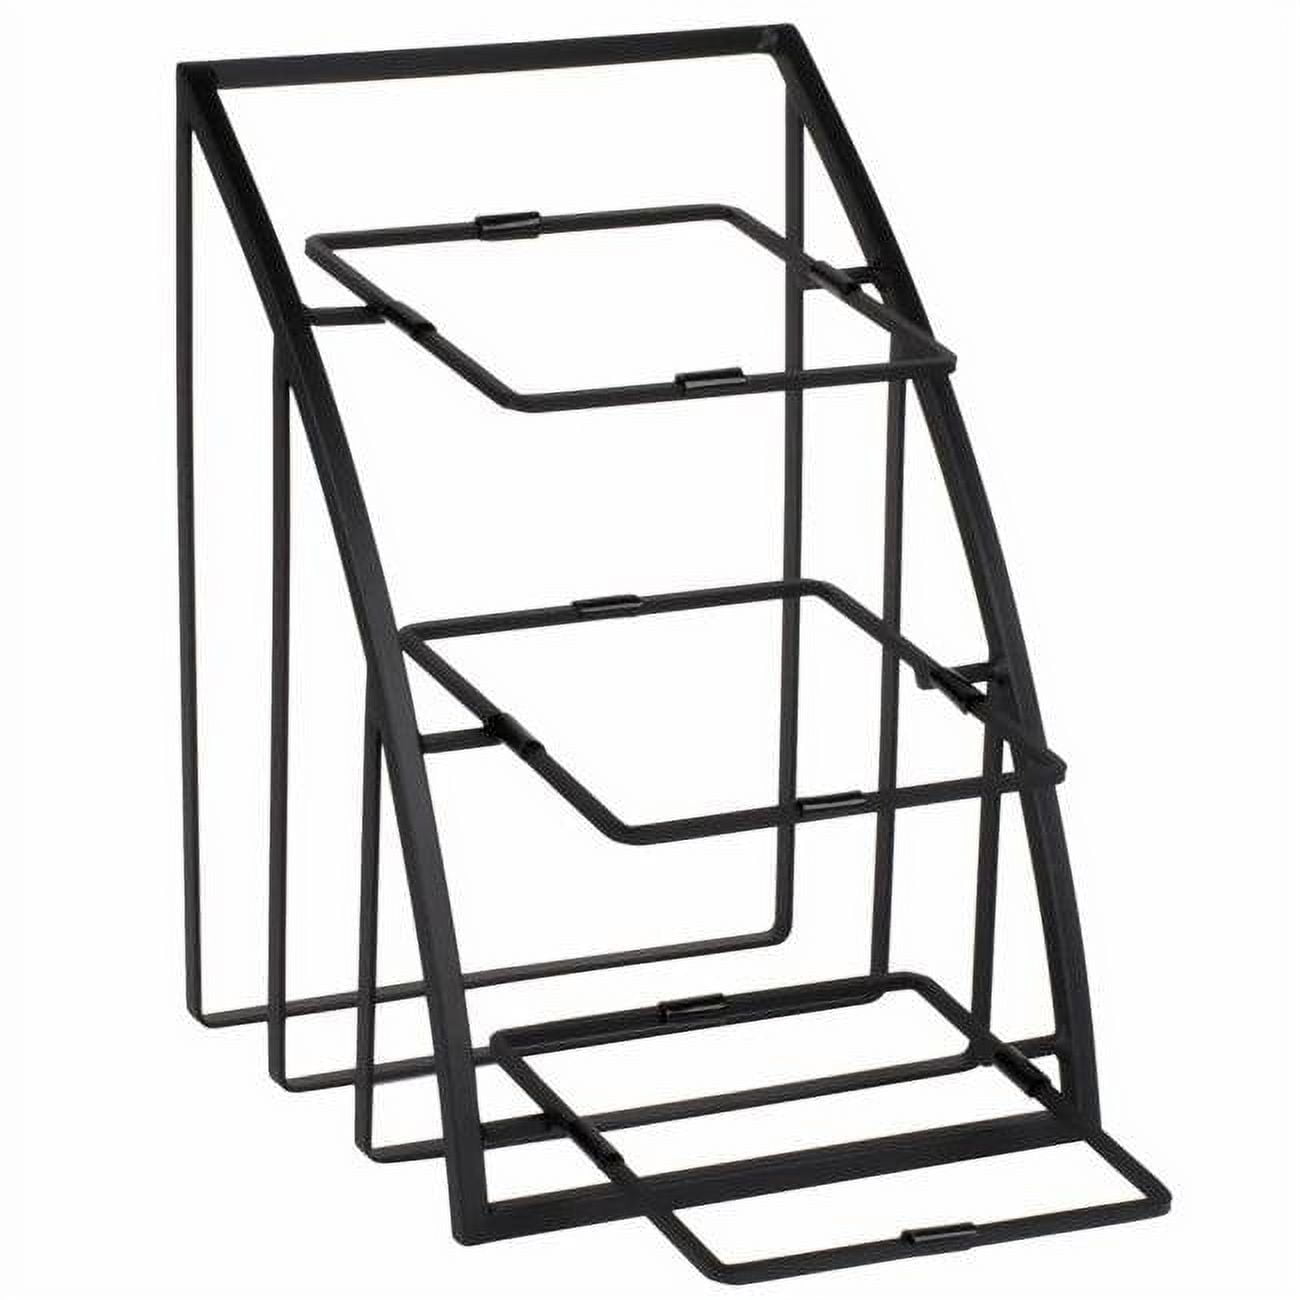 Picture of Cal Mil 1750-13 Mission Black Square Bowl Display Stand - 12 x 19 x 13.5 in.